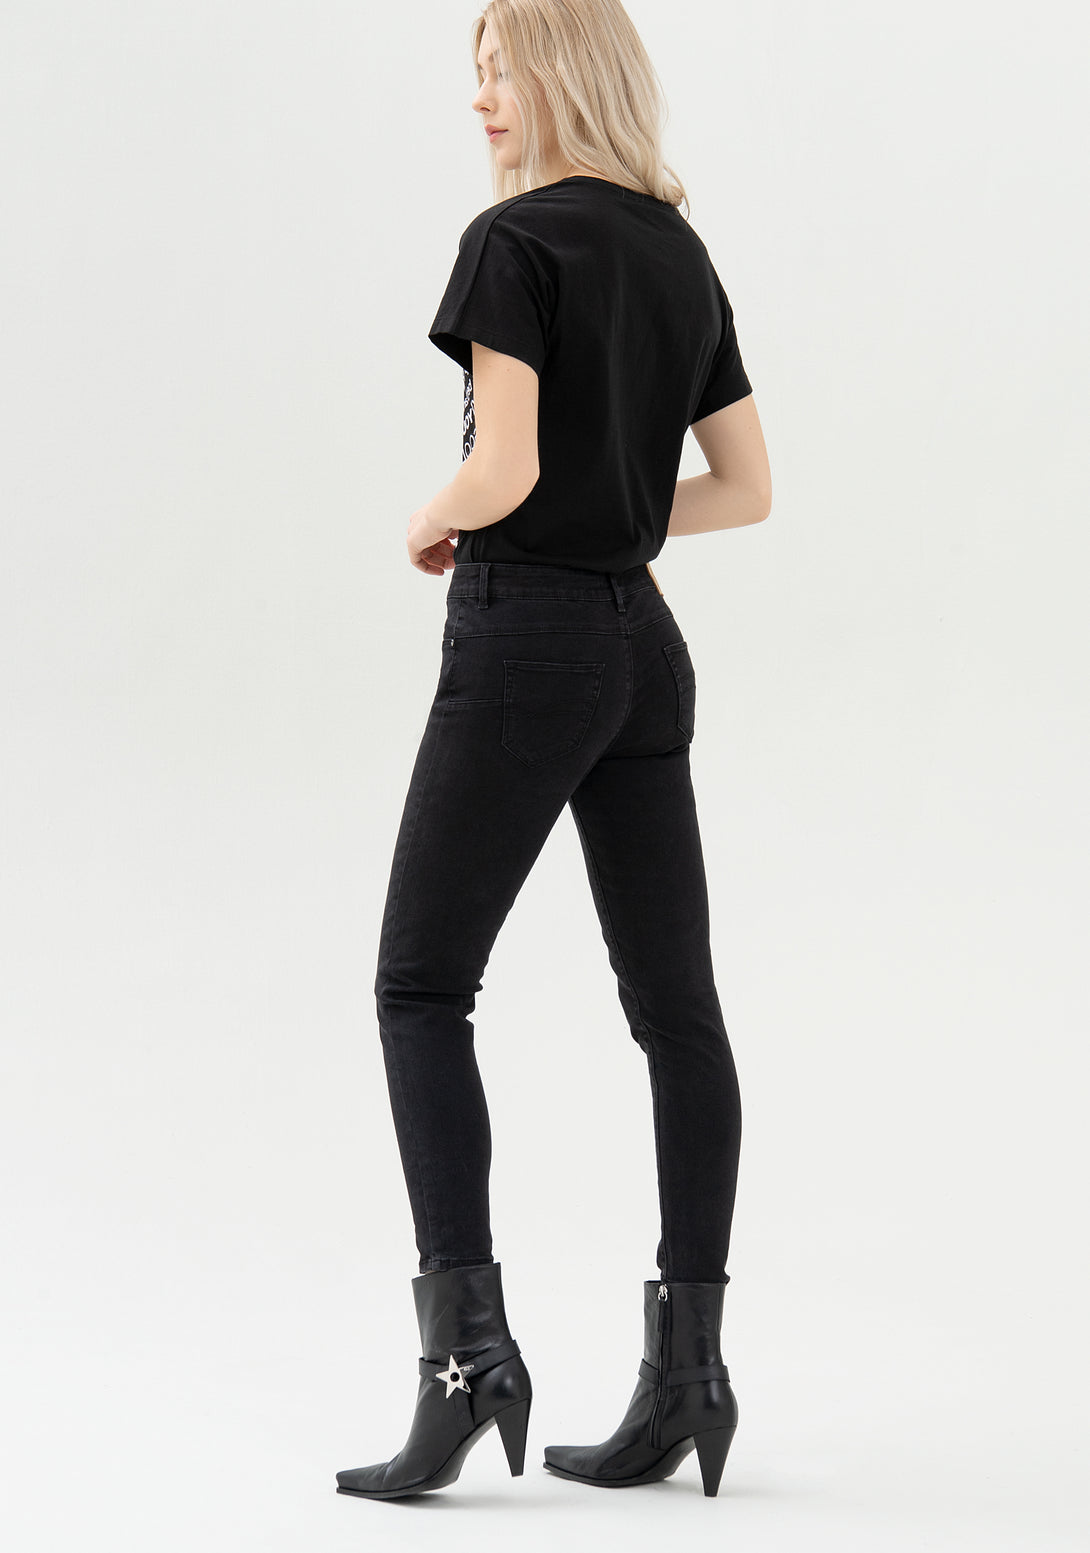 Jeans skinny fit with push-up effect made in black stretch denim with dark wash